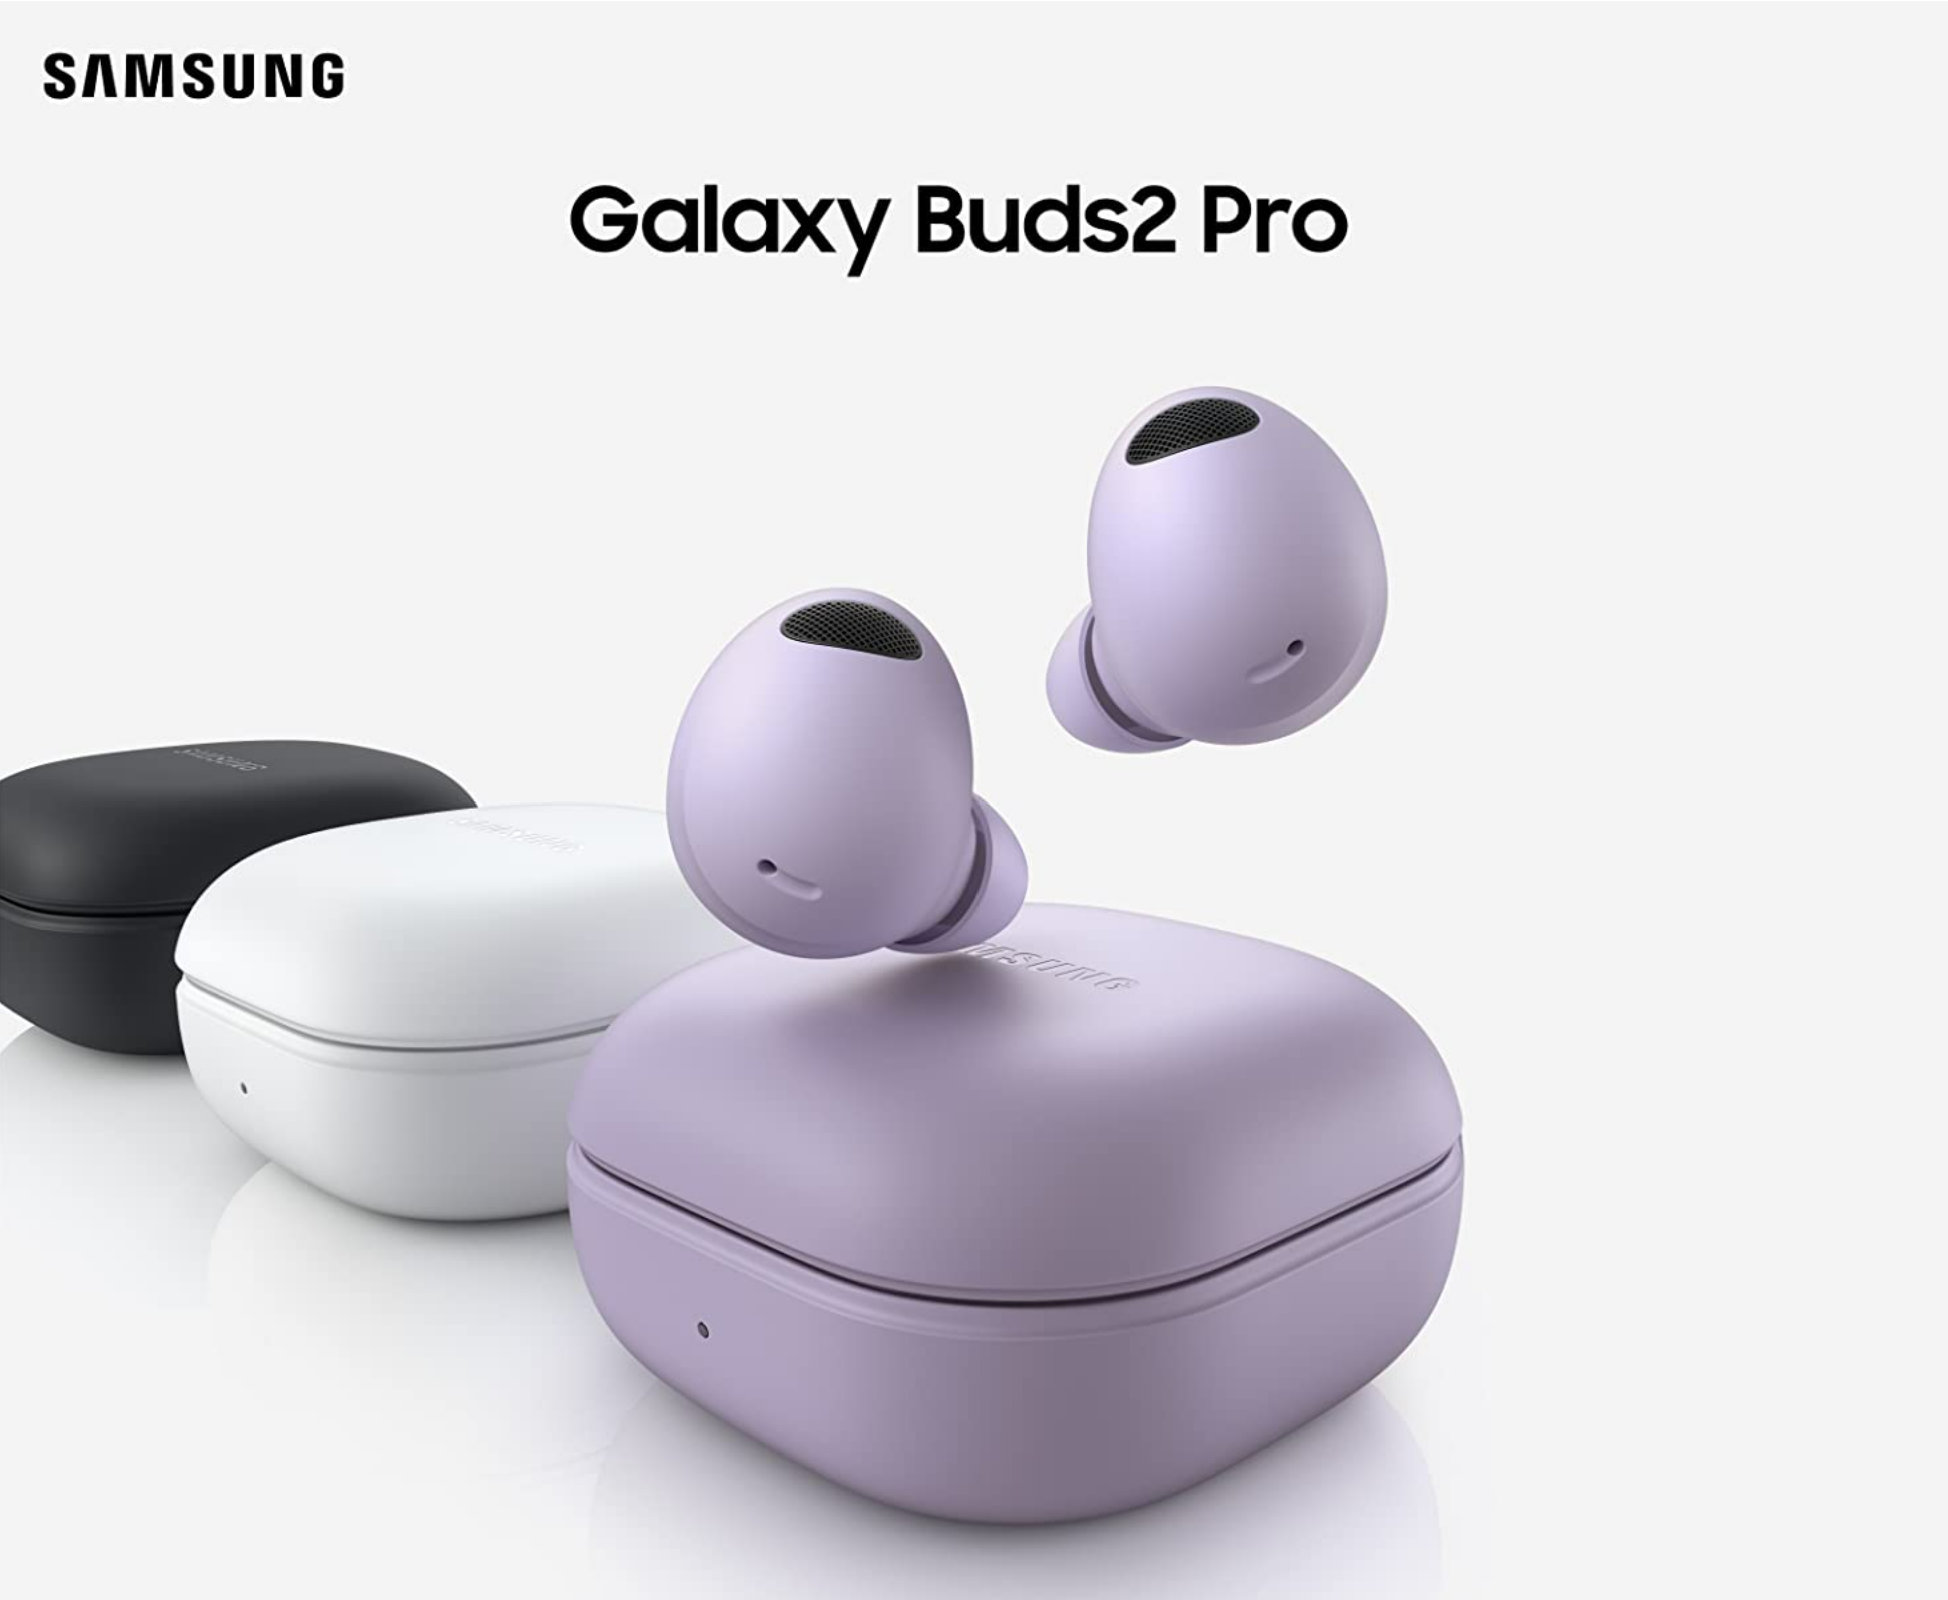 Samsung pushes stability improvements to Galaxy Buds2 Pro with 